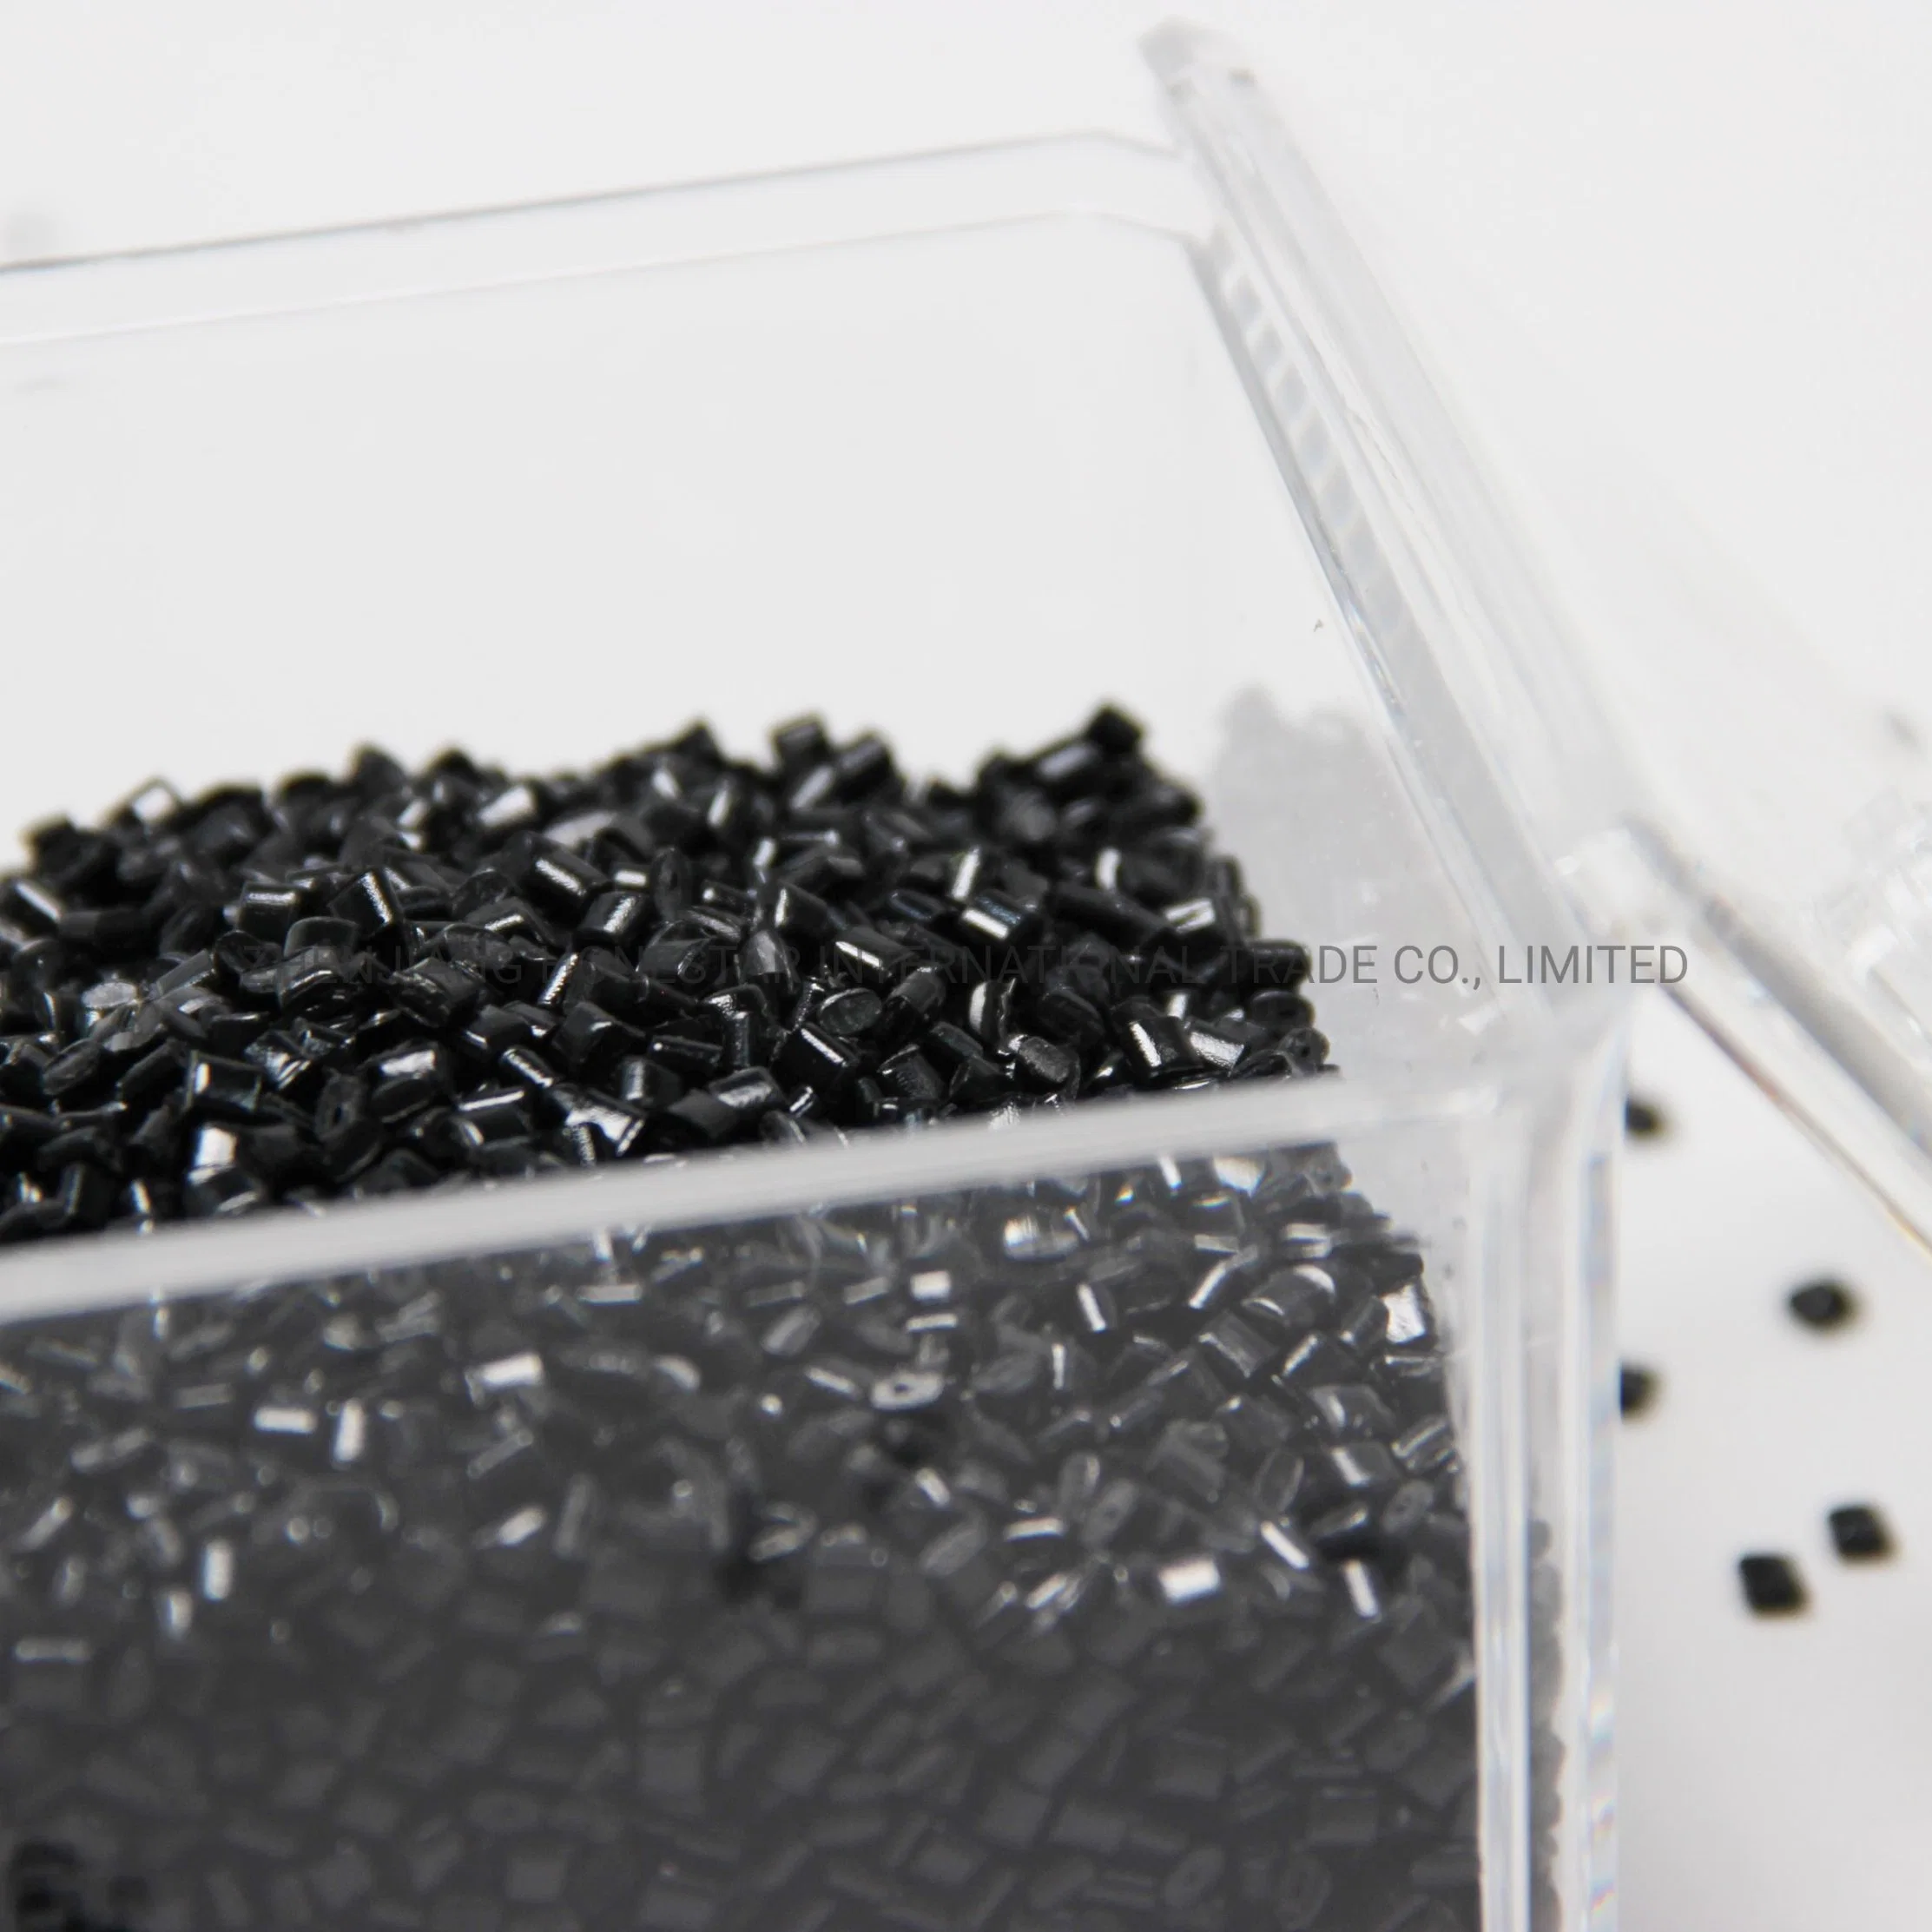 LG Injection Molding Grade UL94 with High Flow and High Impact for Electric Parts ABS Af312c-C9057 ABS Granules Flame Retardant ABS Resin Fr ABS Pellets